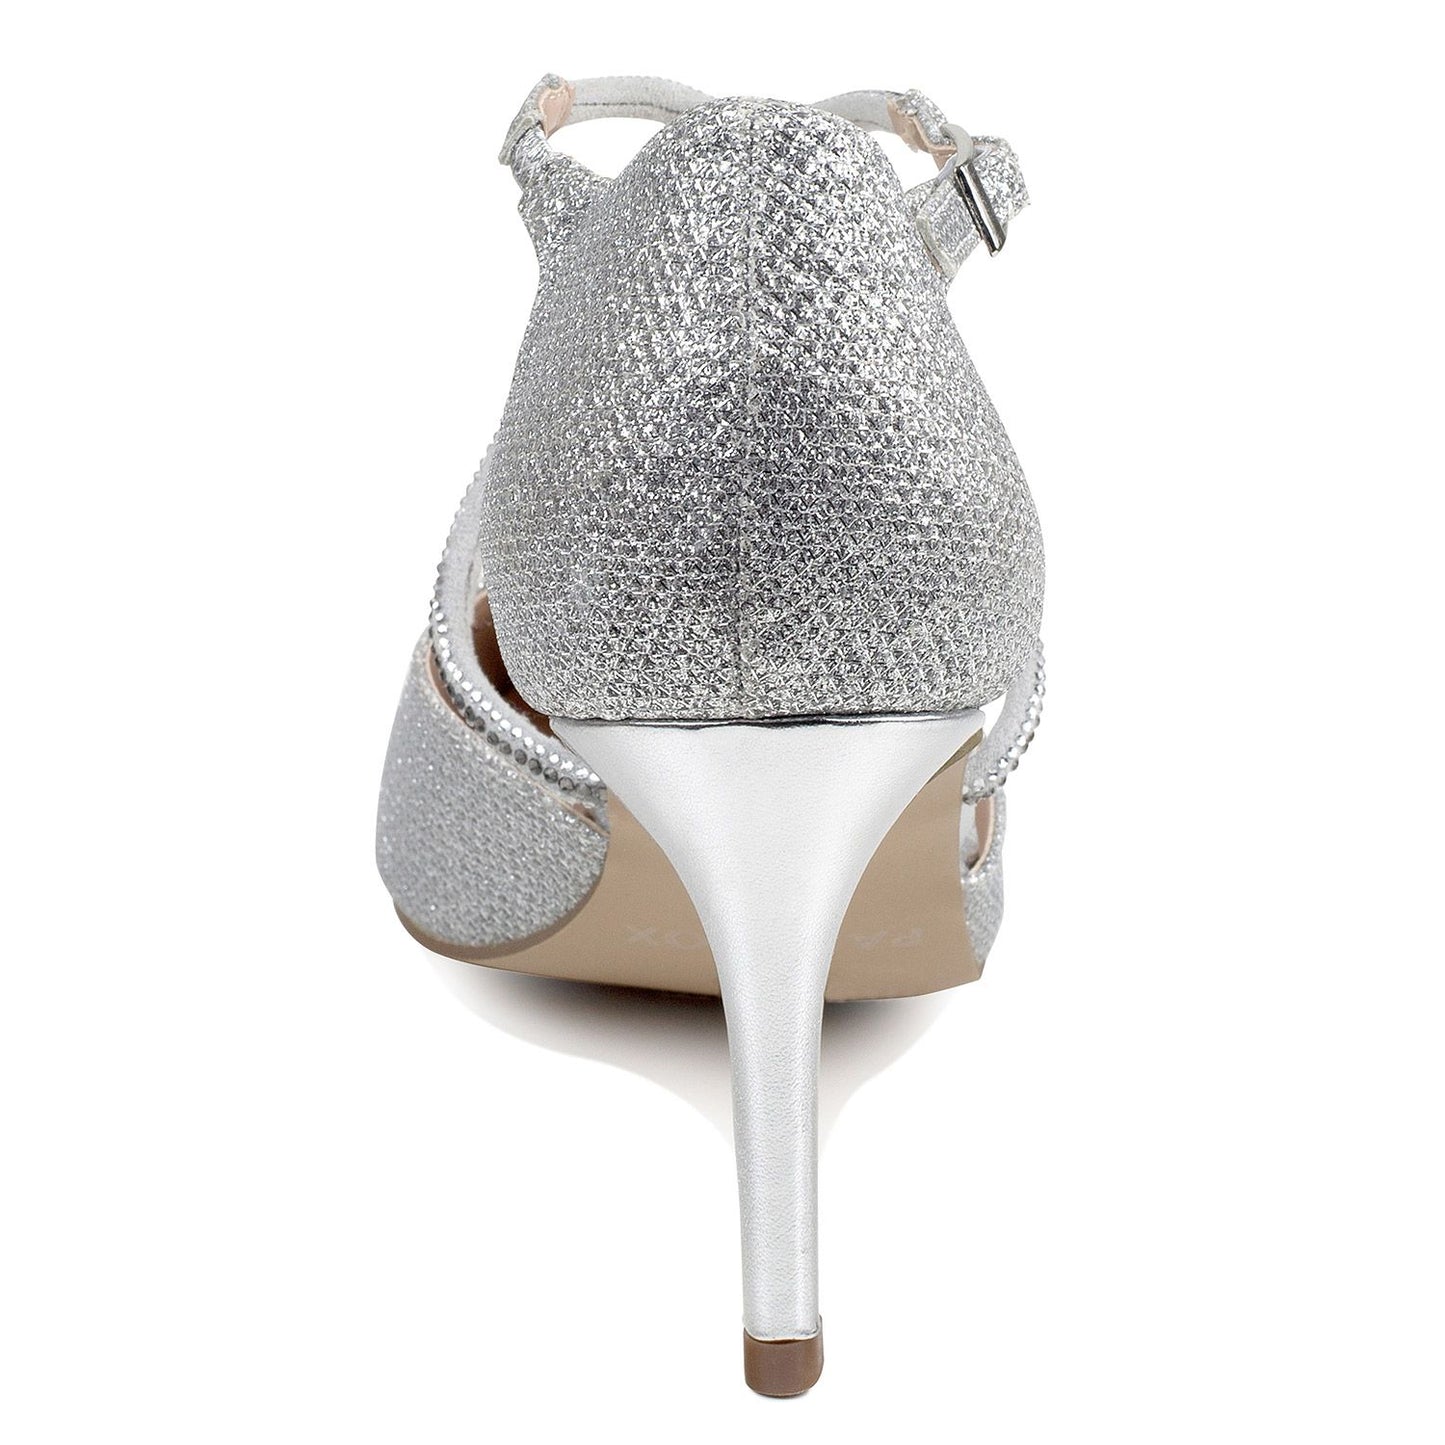 Back view of 3/4 inch high heel with silver metallic materia